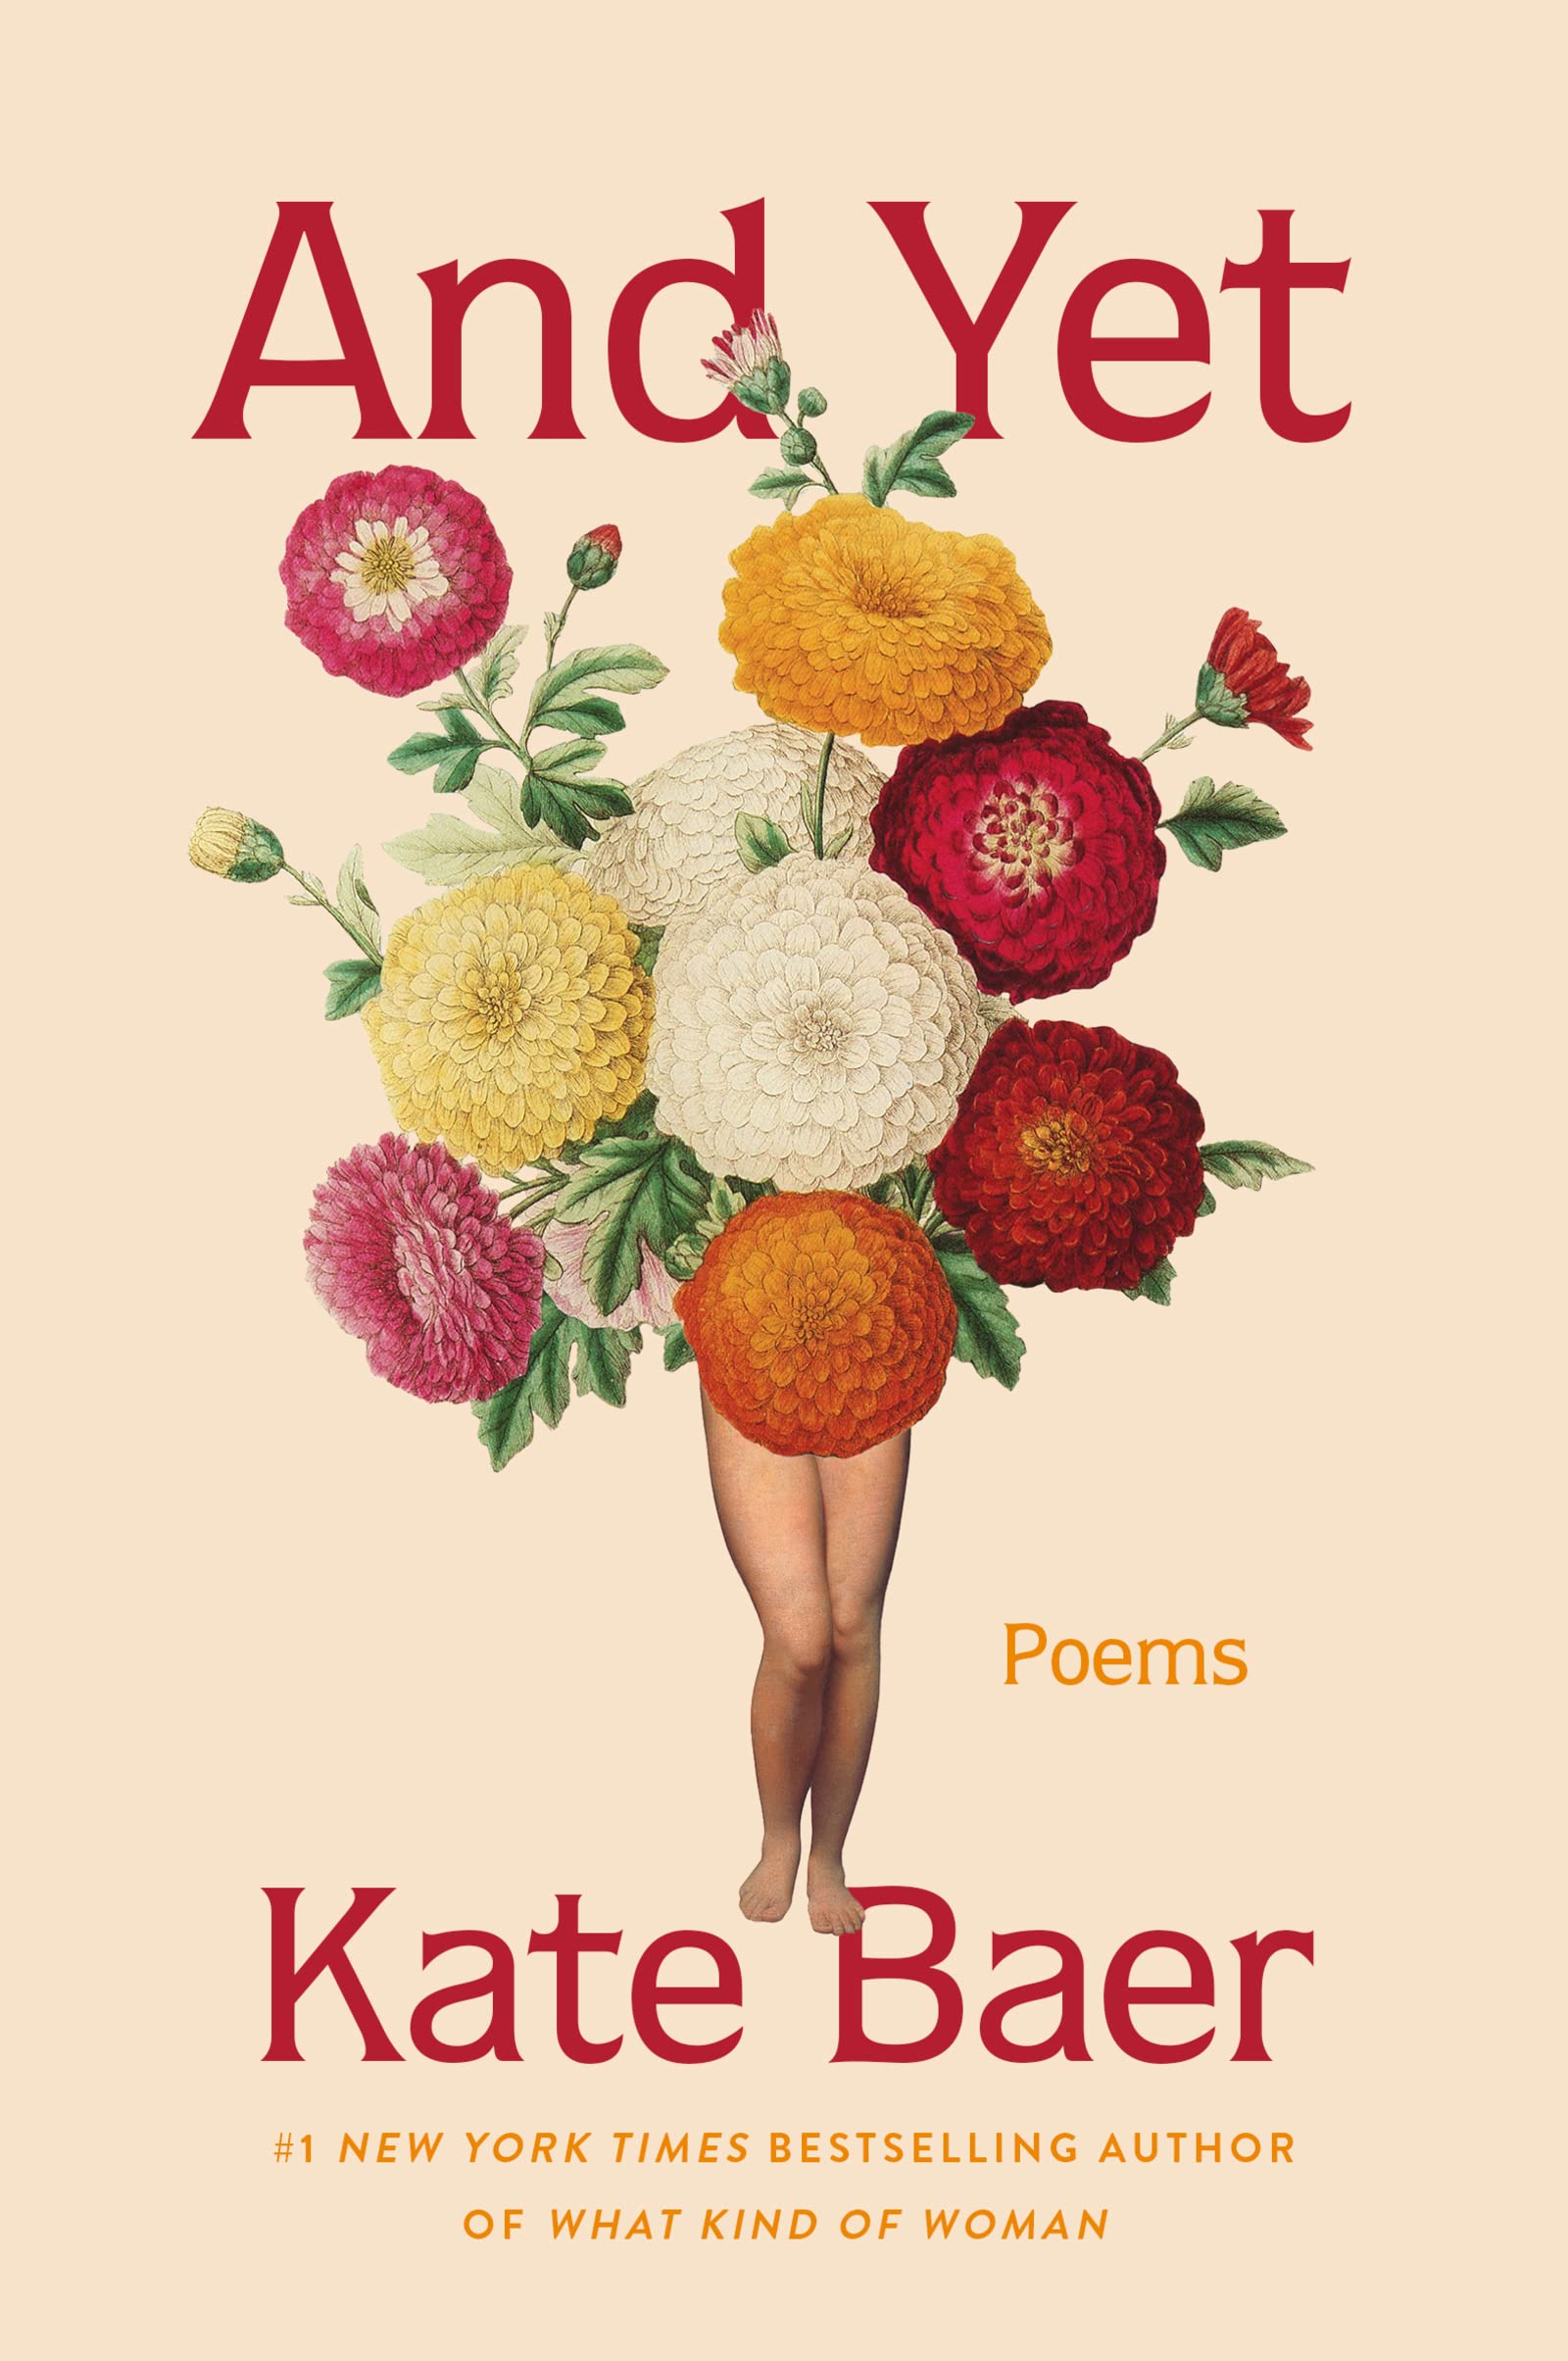 In-Person Event with Kate Baer/And Yet